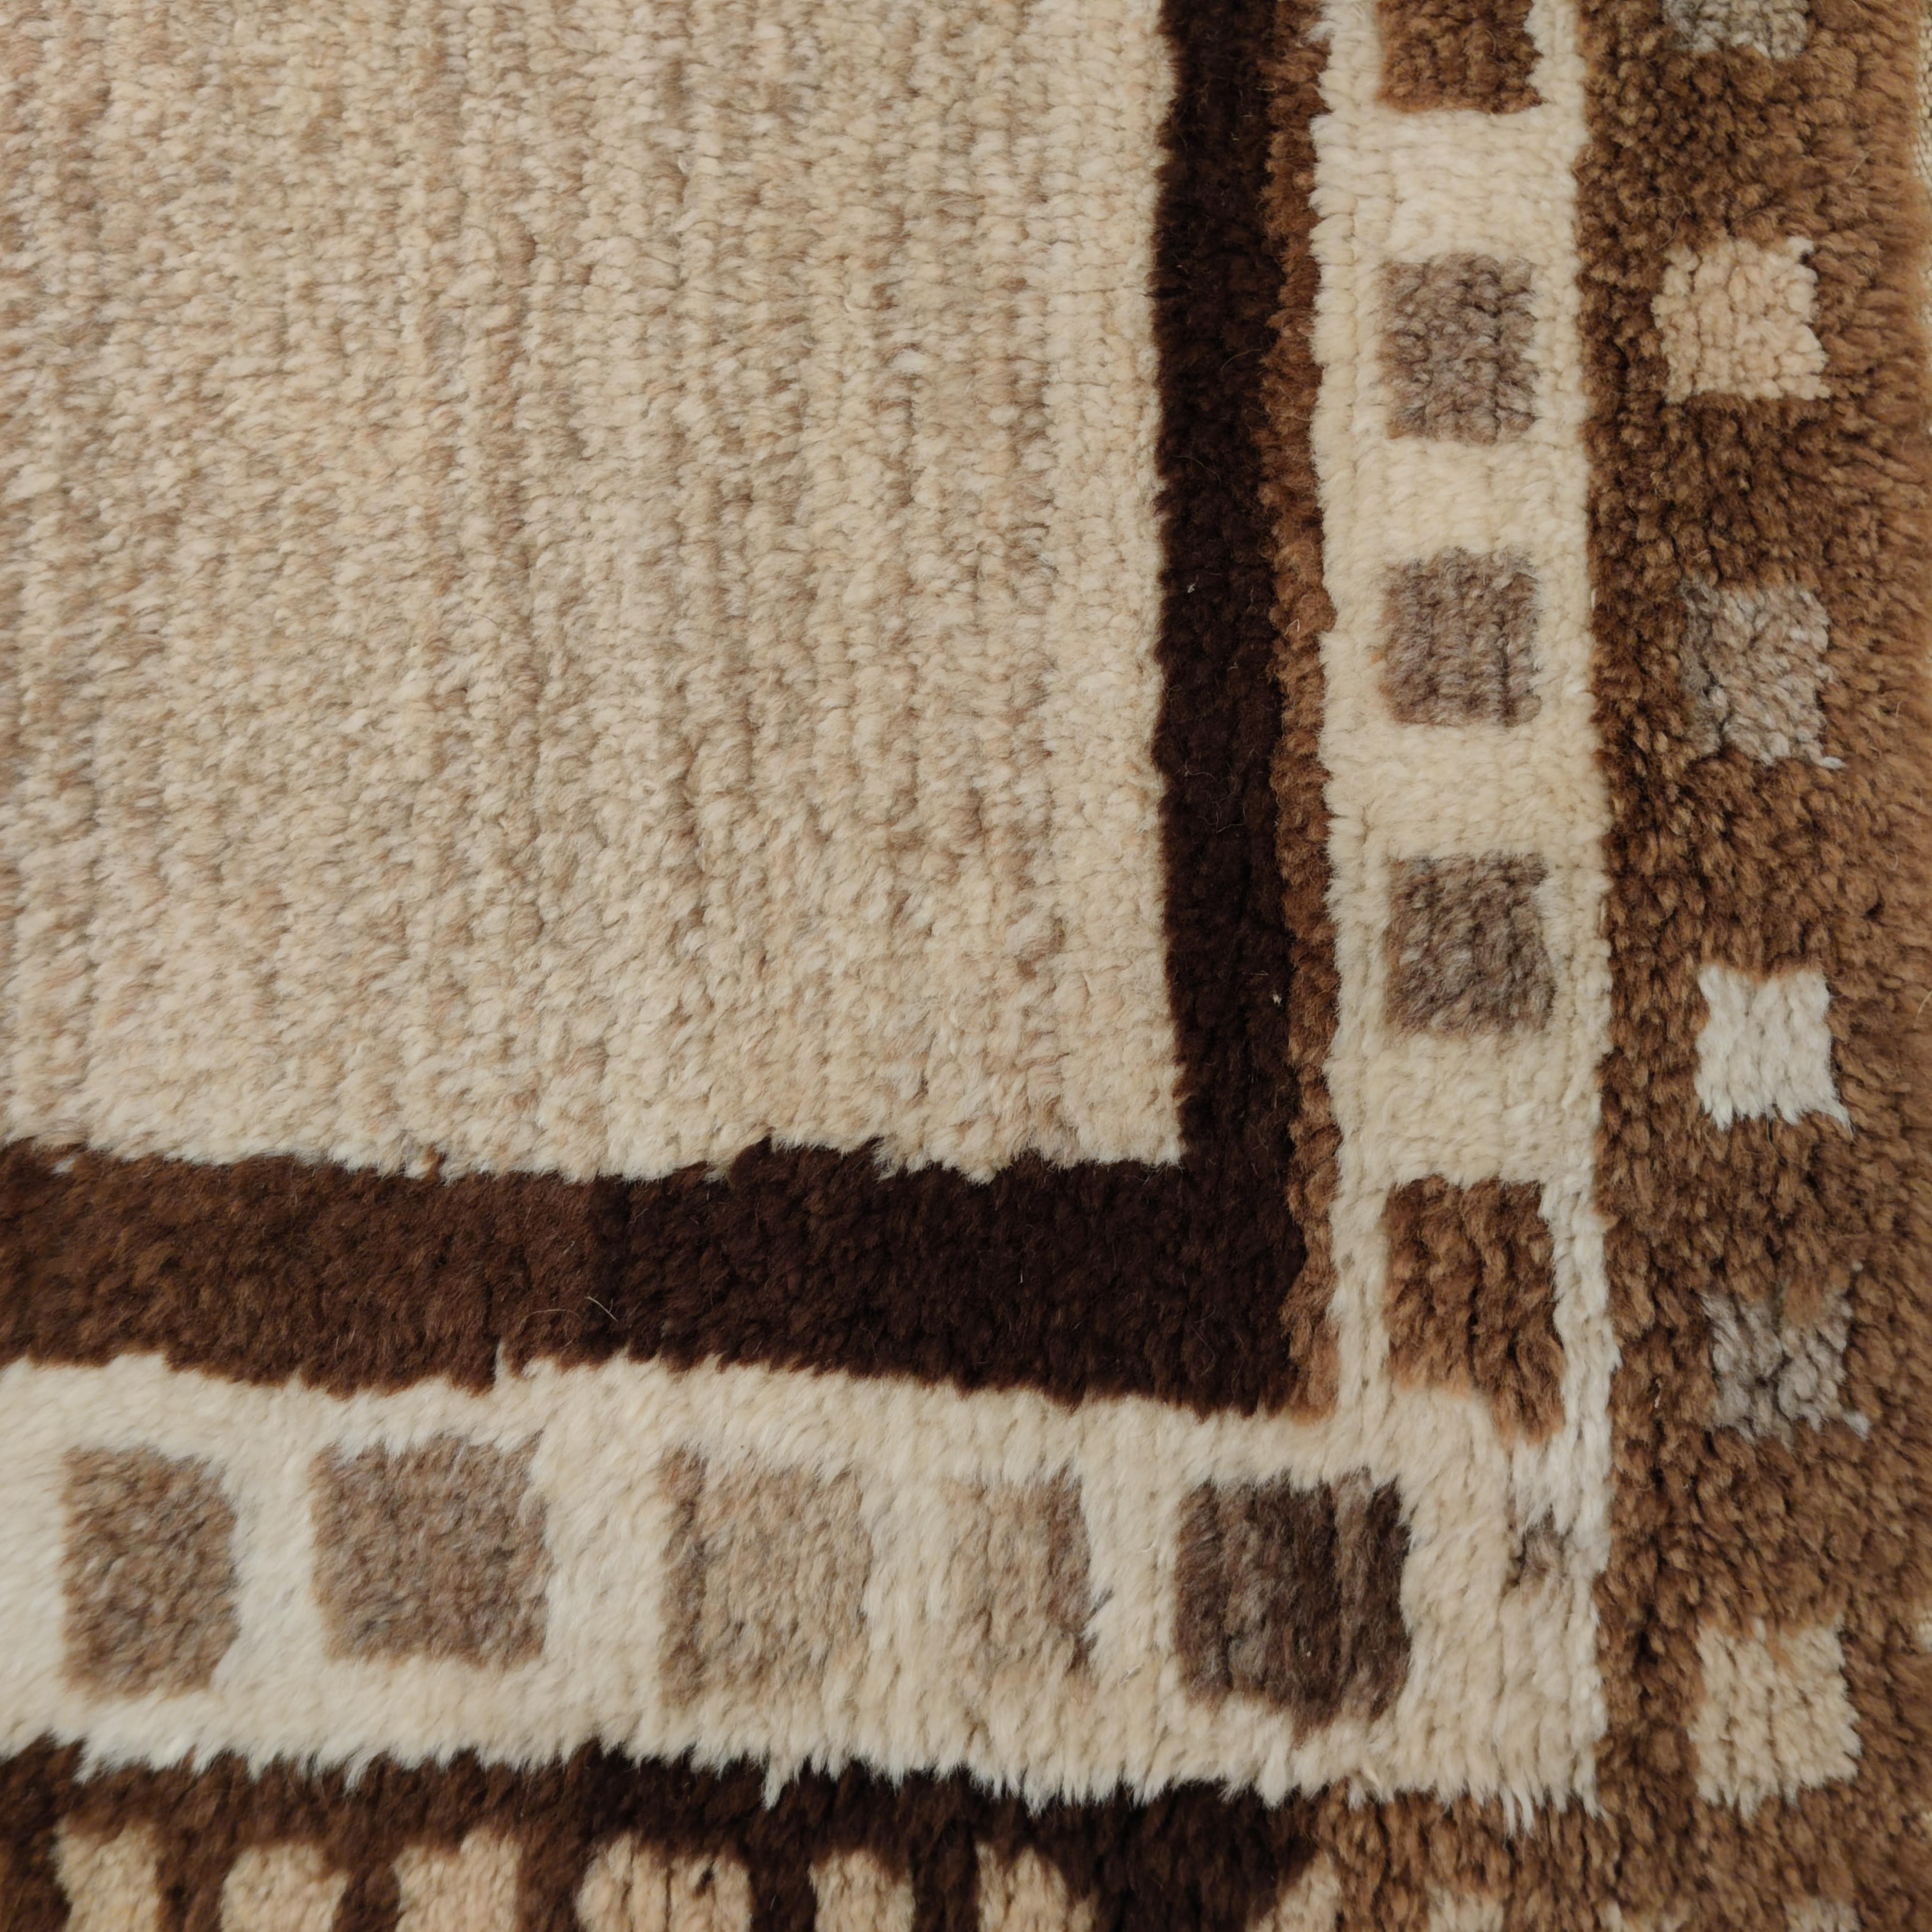 A truly elegant Kurdish Anatolian tribal rug from eastern Turkey distinguished by the use of natural, undyed camel hair for the background. It's sparsely decorated by a sequence of five conjoined diamond medallions with stepped outlines in tones of